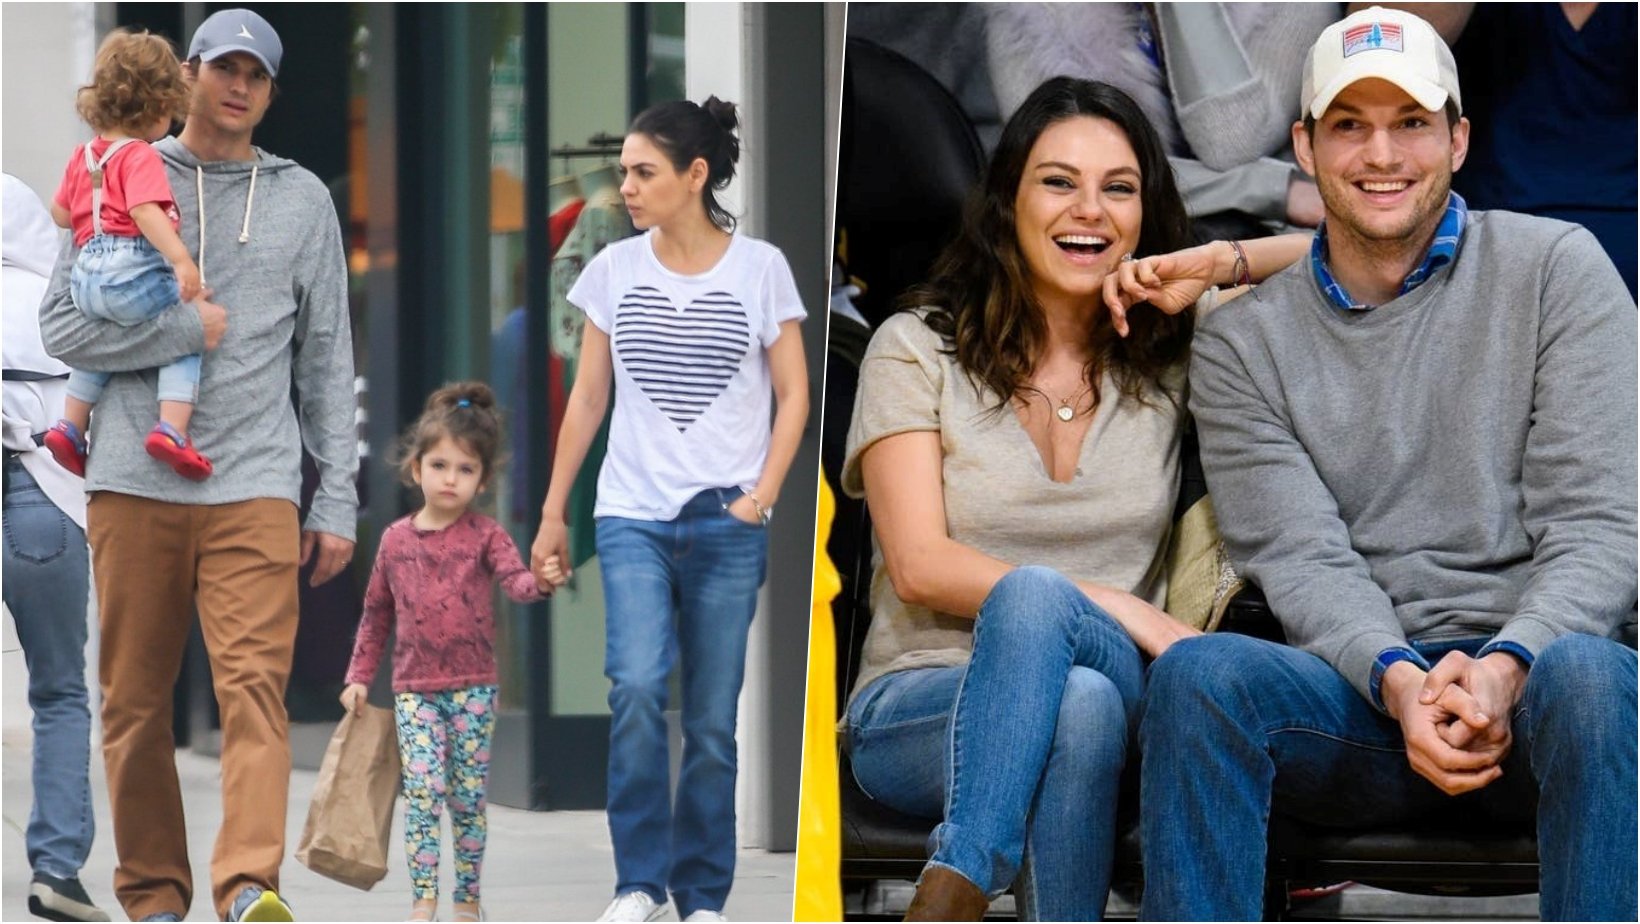 6 facebook cover 26.jpg?resize=1200,630 - Mila Kunis Reveals That Ashton Kutcher Disagreed With Her Parenting When She Encouraged Their Daughter To Push Another Kid